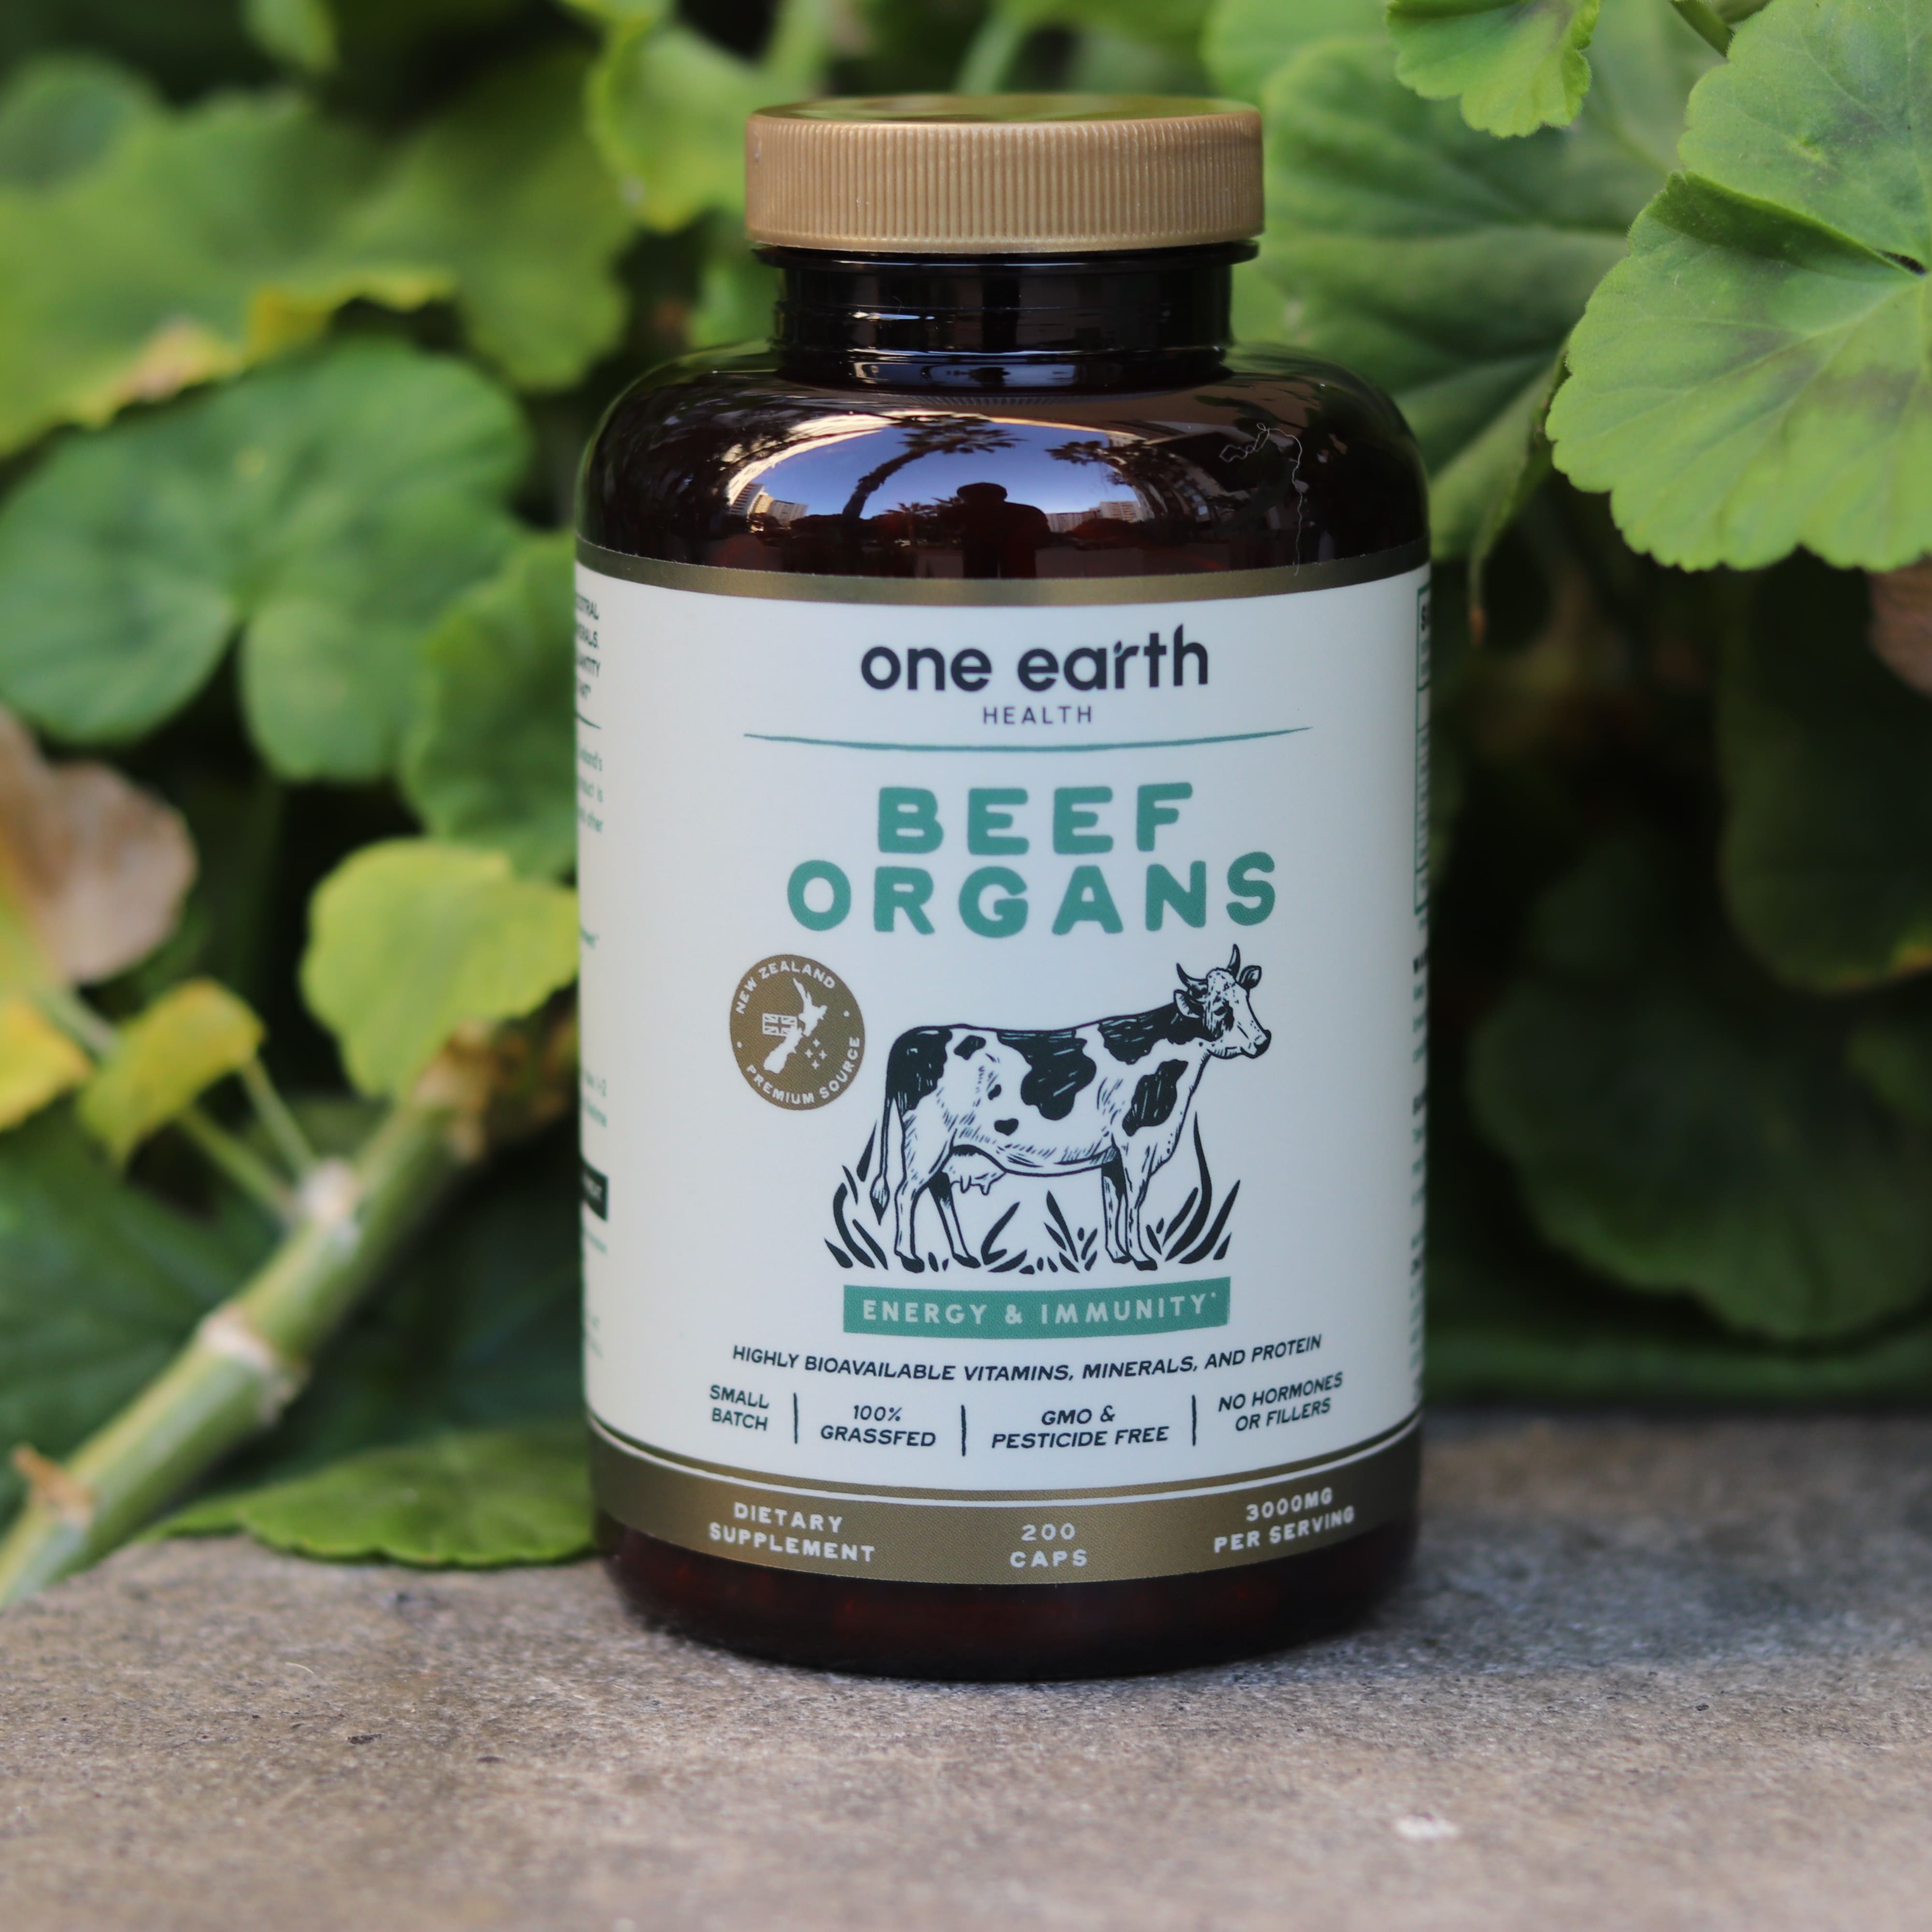 Grass fed beef organs supplement by One Earth Health